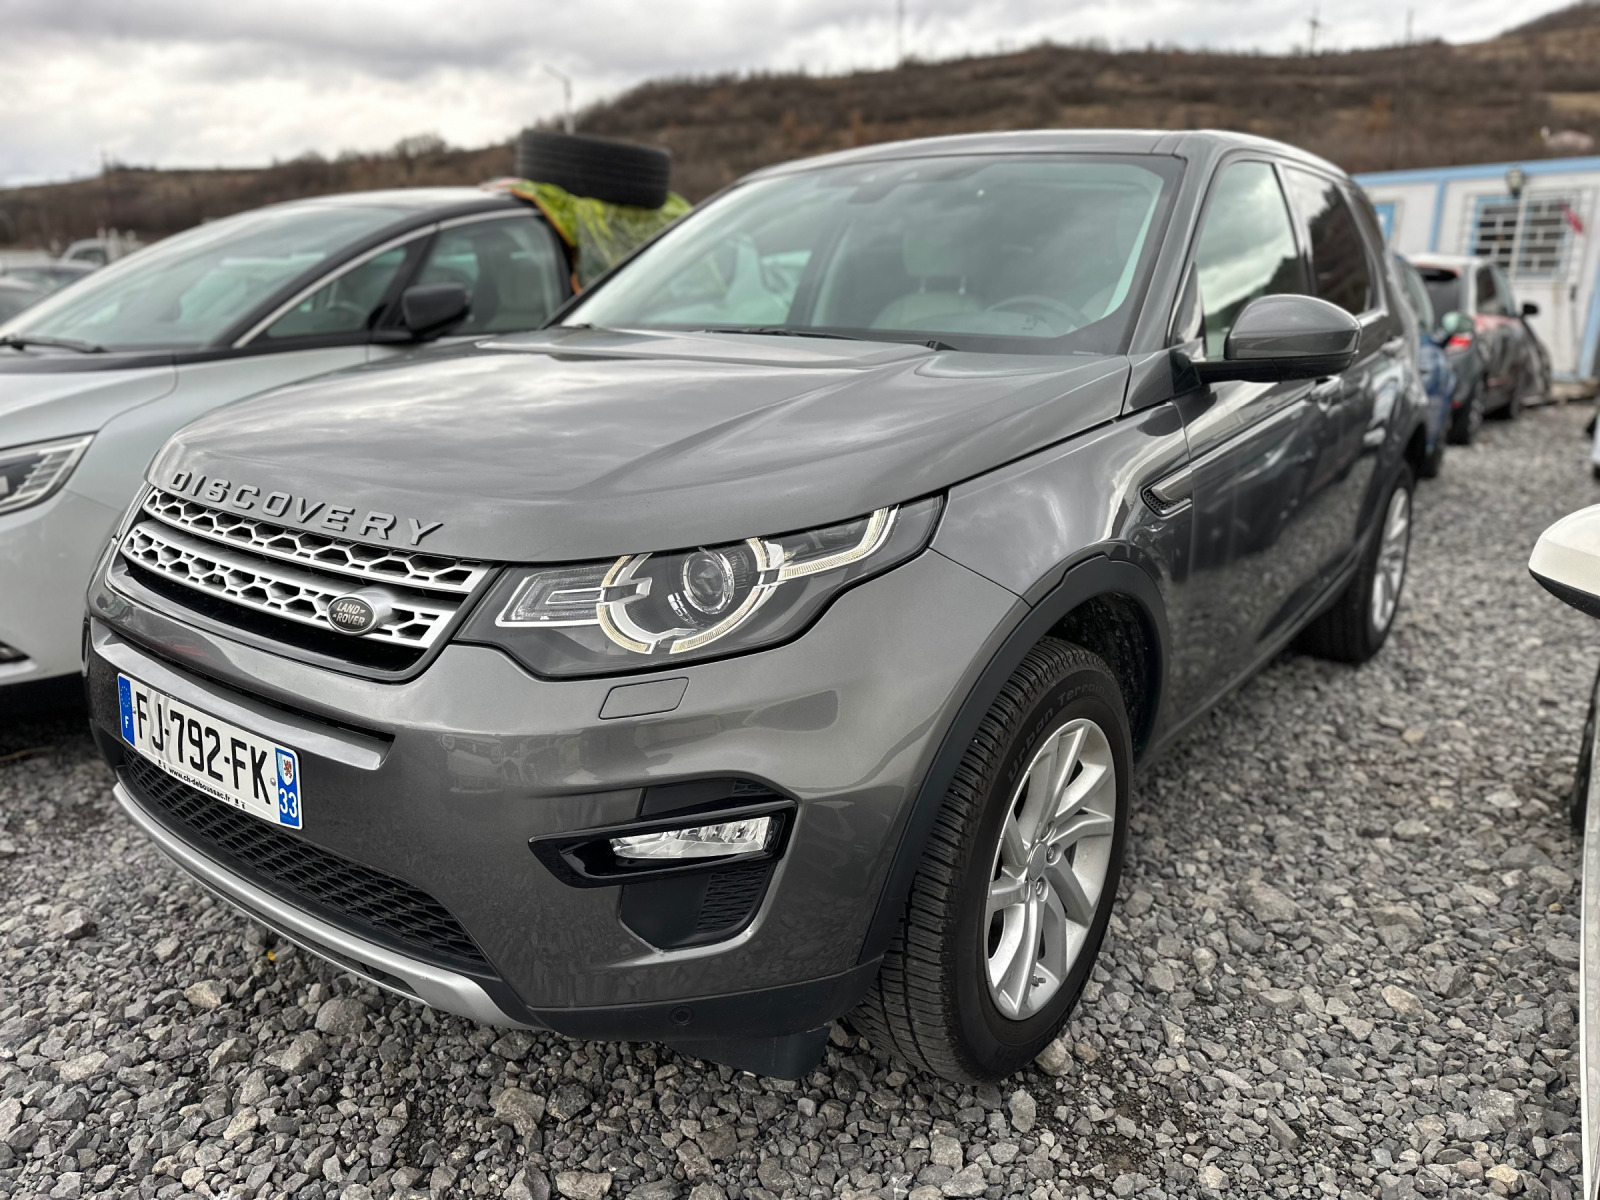 Land Rover Discovery Sport 2.2D/Automat - изображение 1